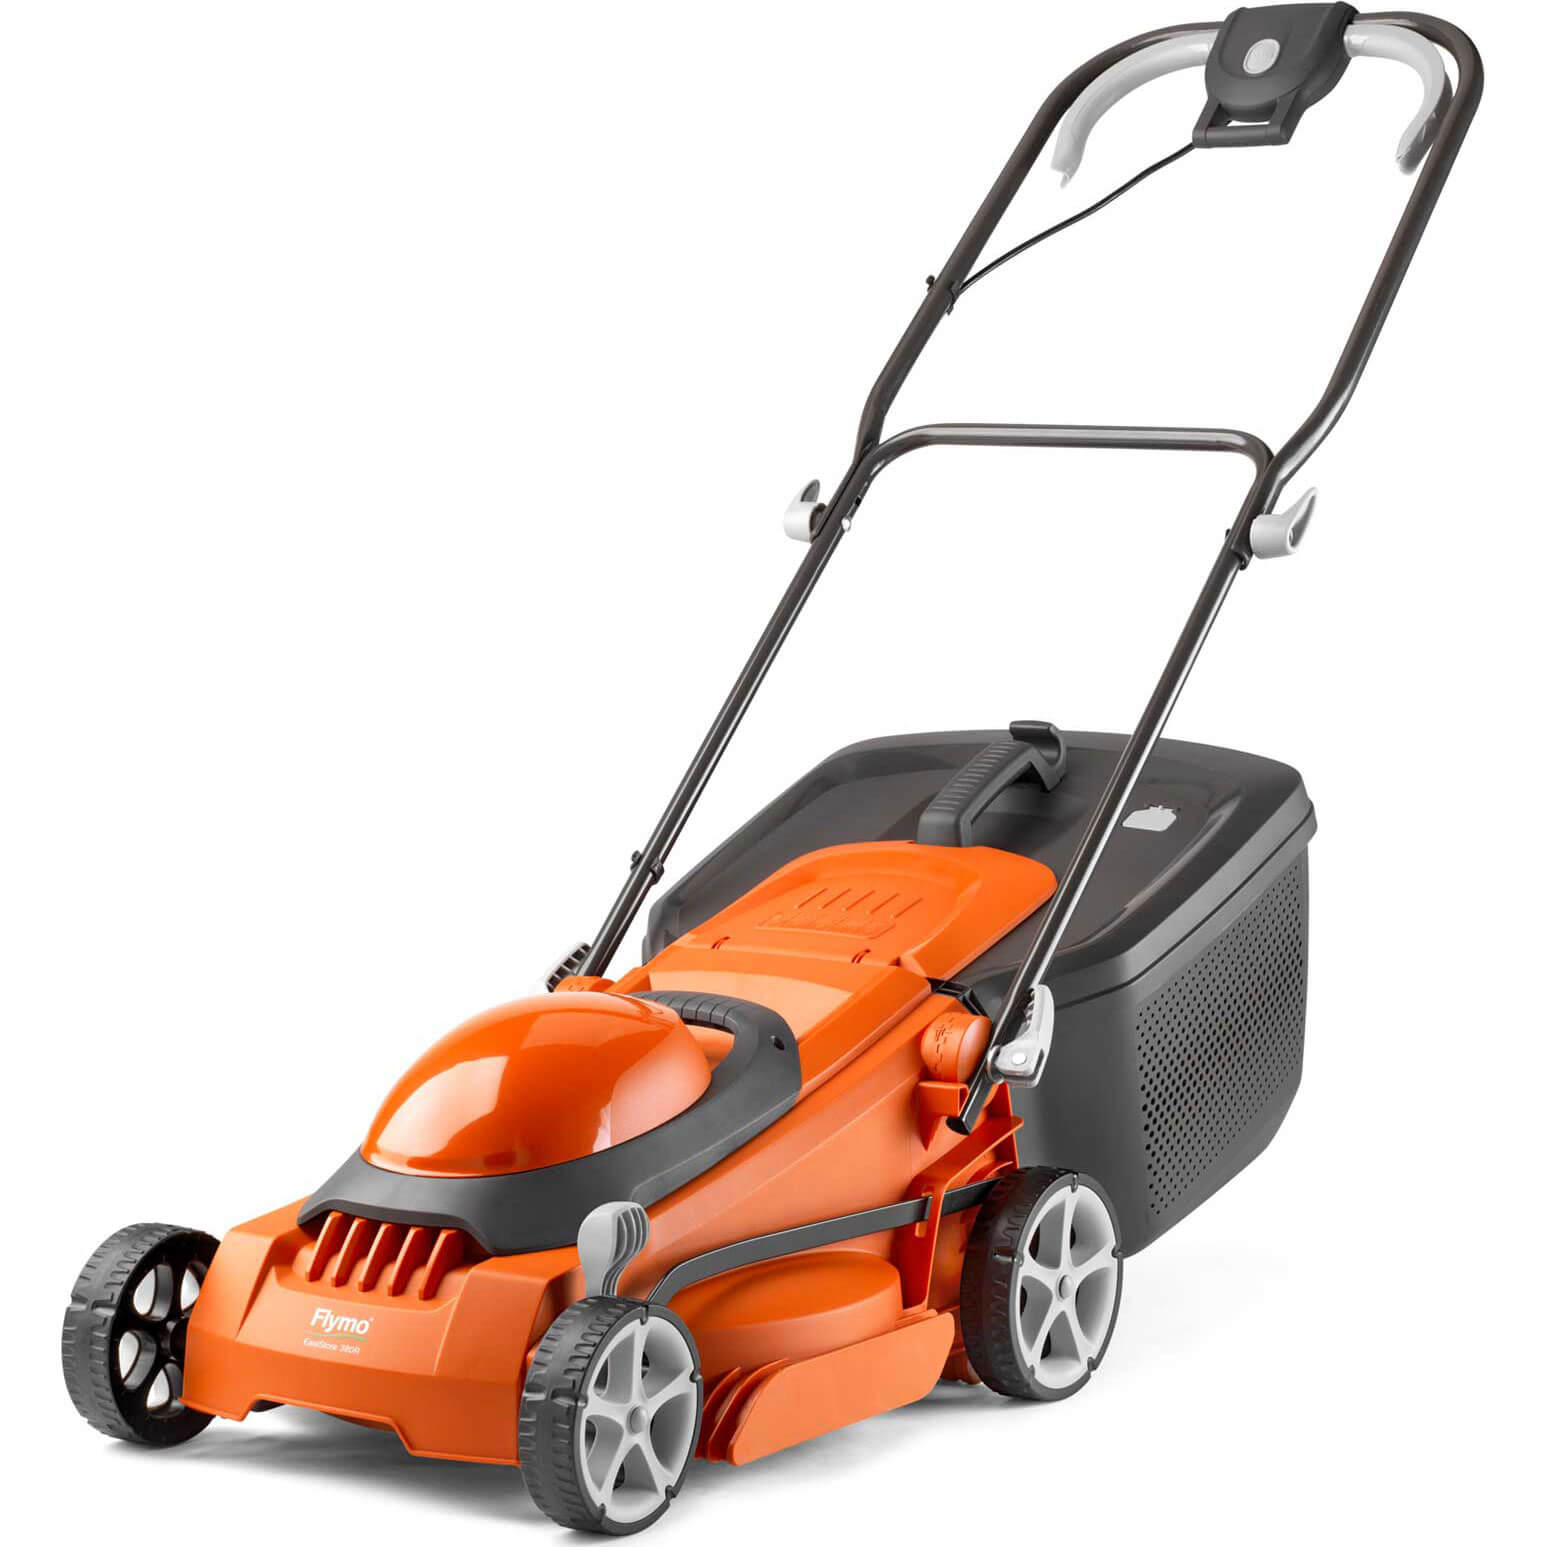 Image of Flymo EASI STORE 380R Rotary Lawnmower 380mm 240v